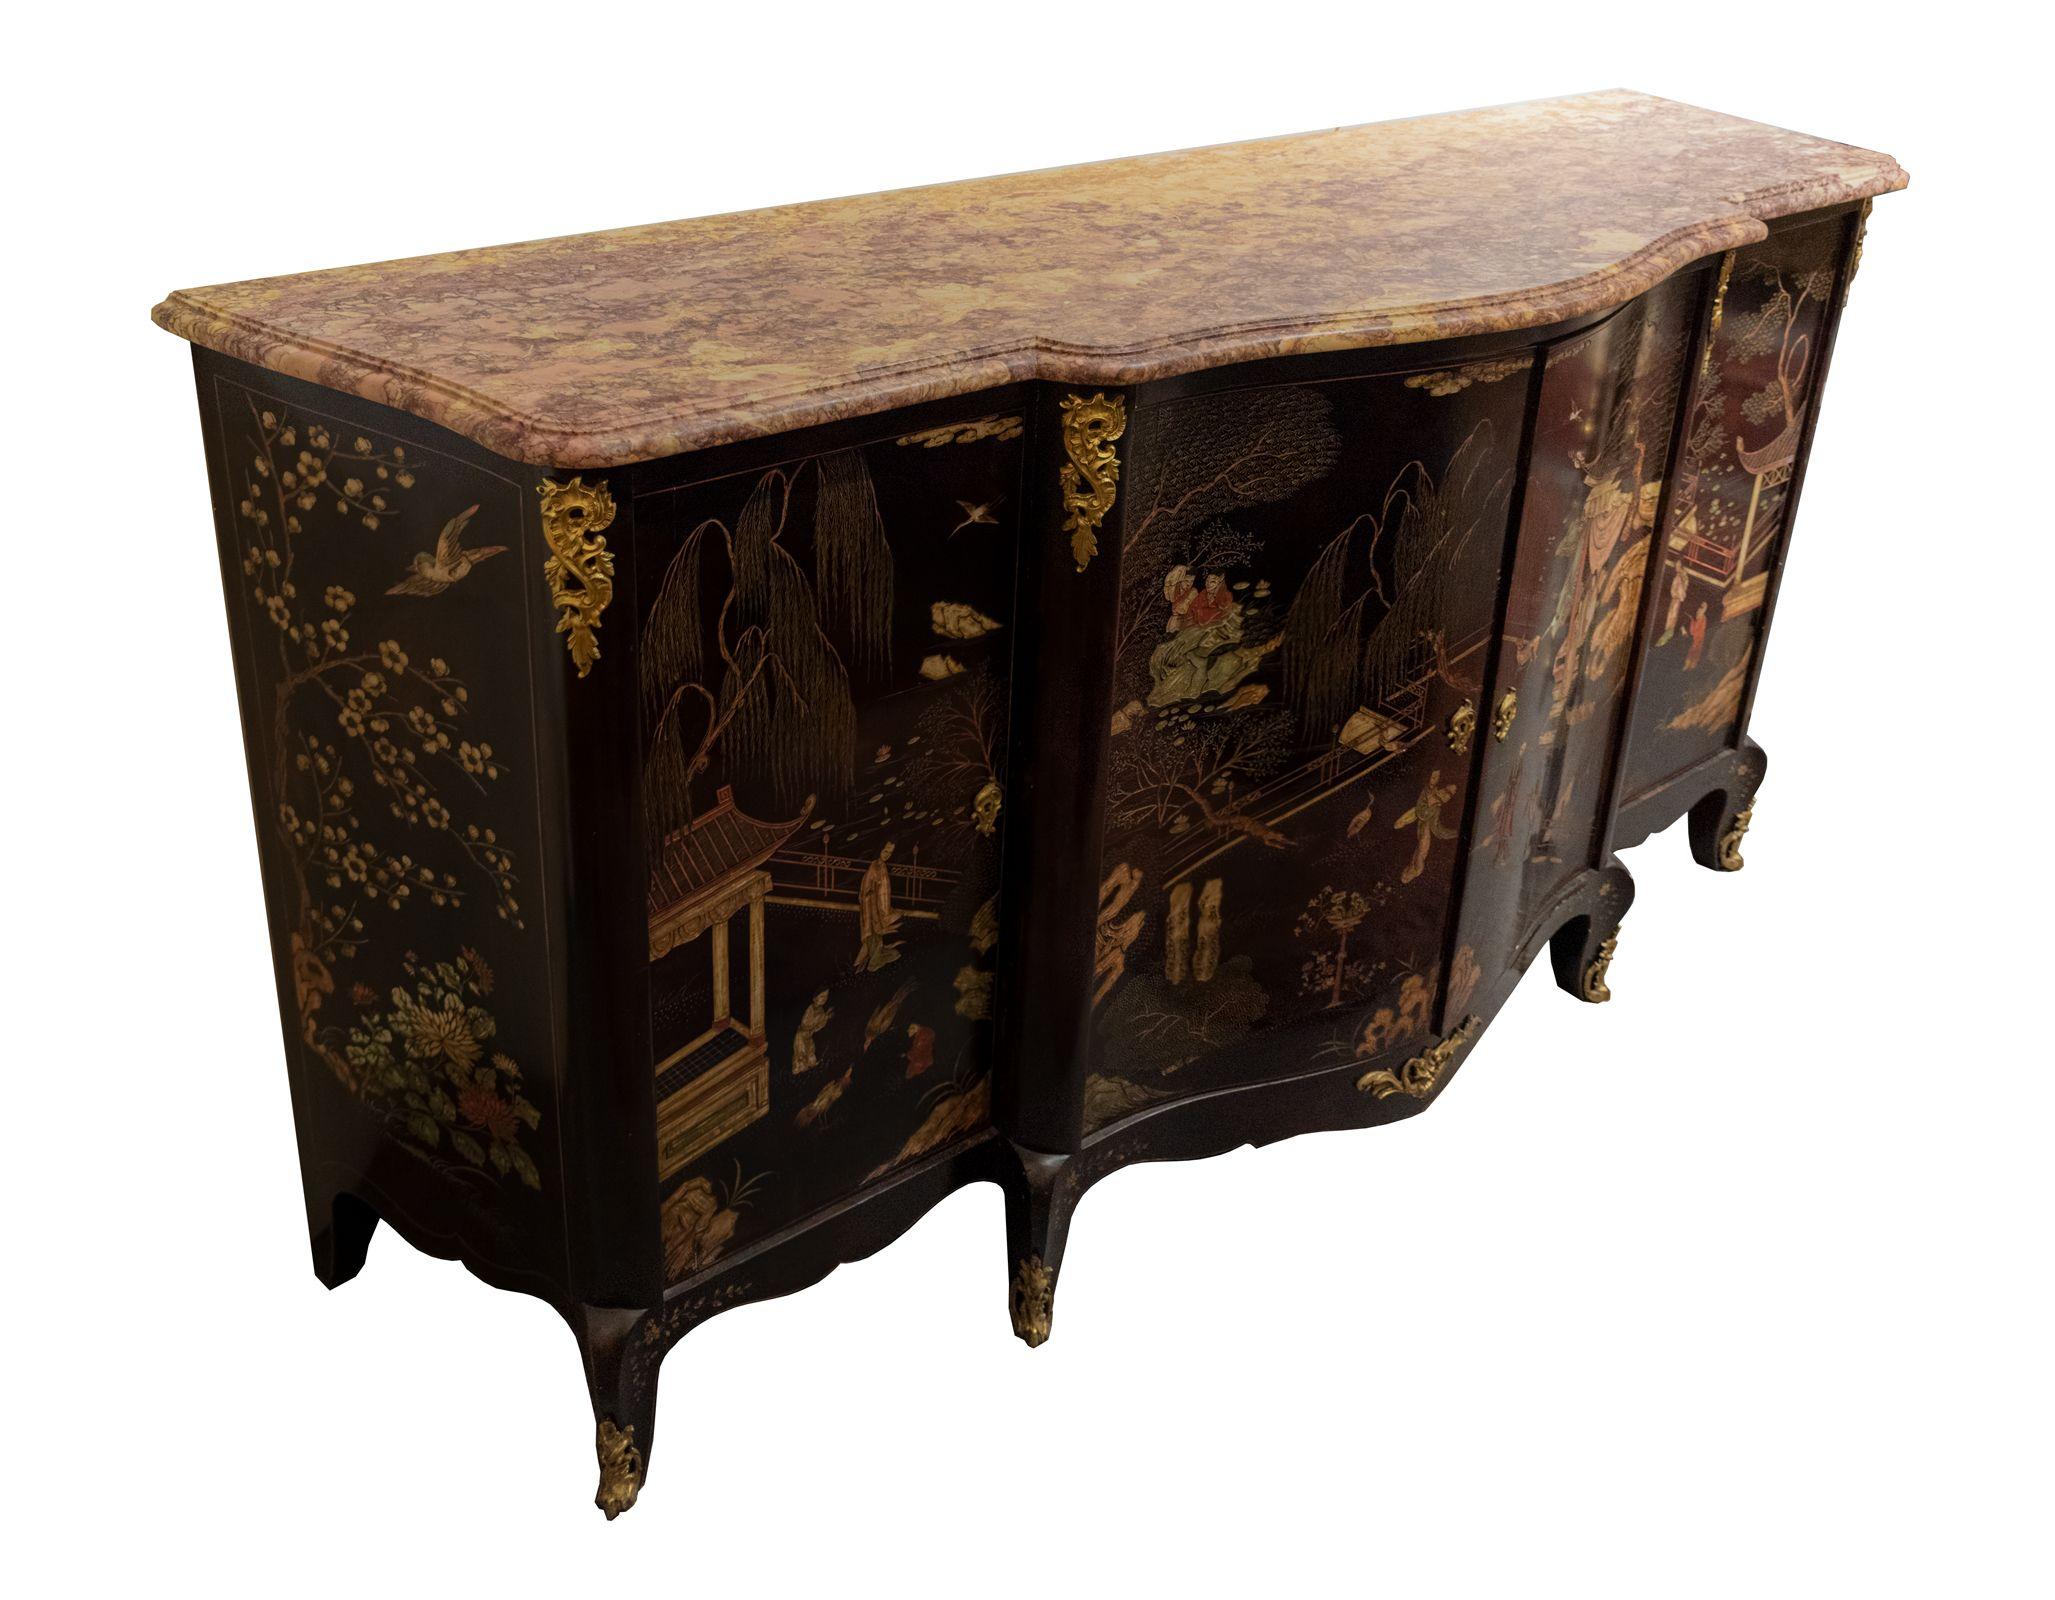 A French Transitional-style Coromandel buffet with Ormolu mounts and marble top. The four doors and two side panels are decorated in Coromandel lacquer depicting Chinese literary scenes, flora and fauna. The legs, columns and bottom stretcher